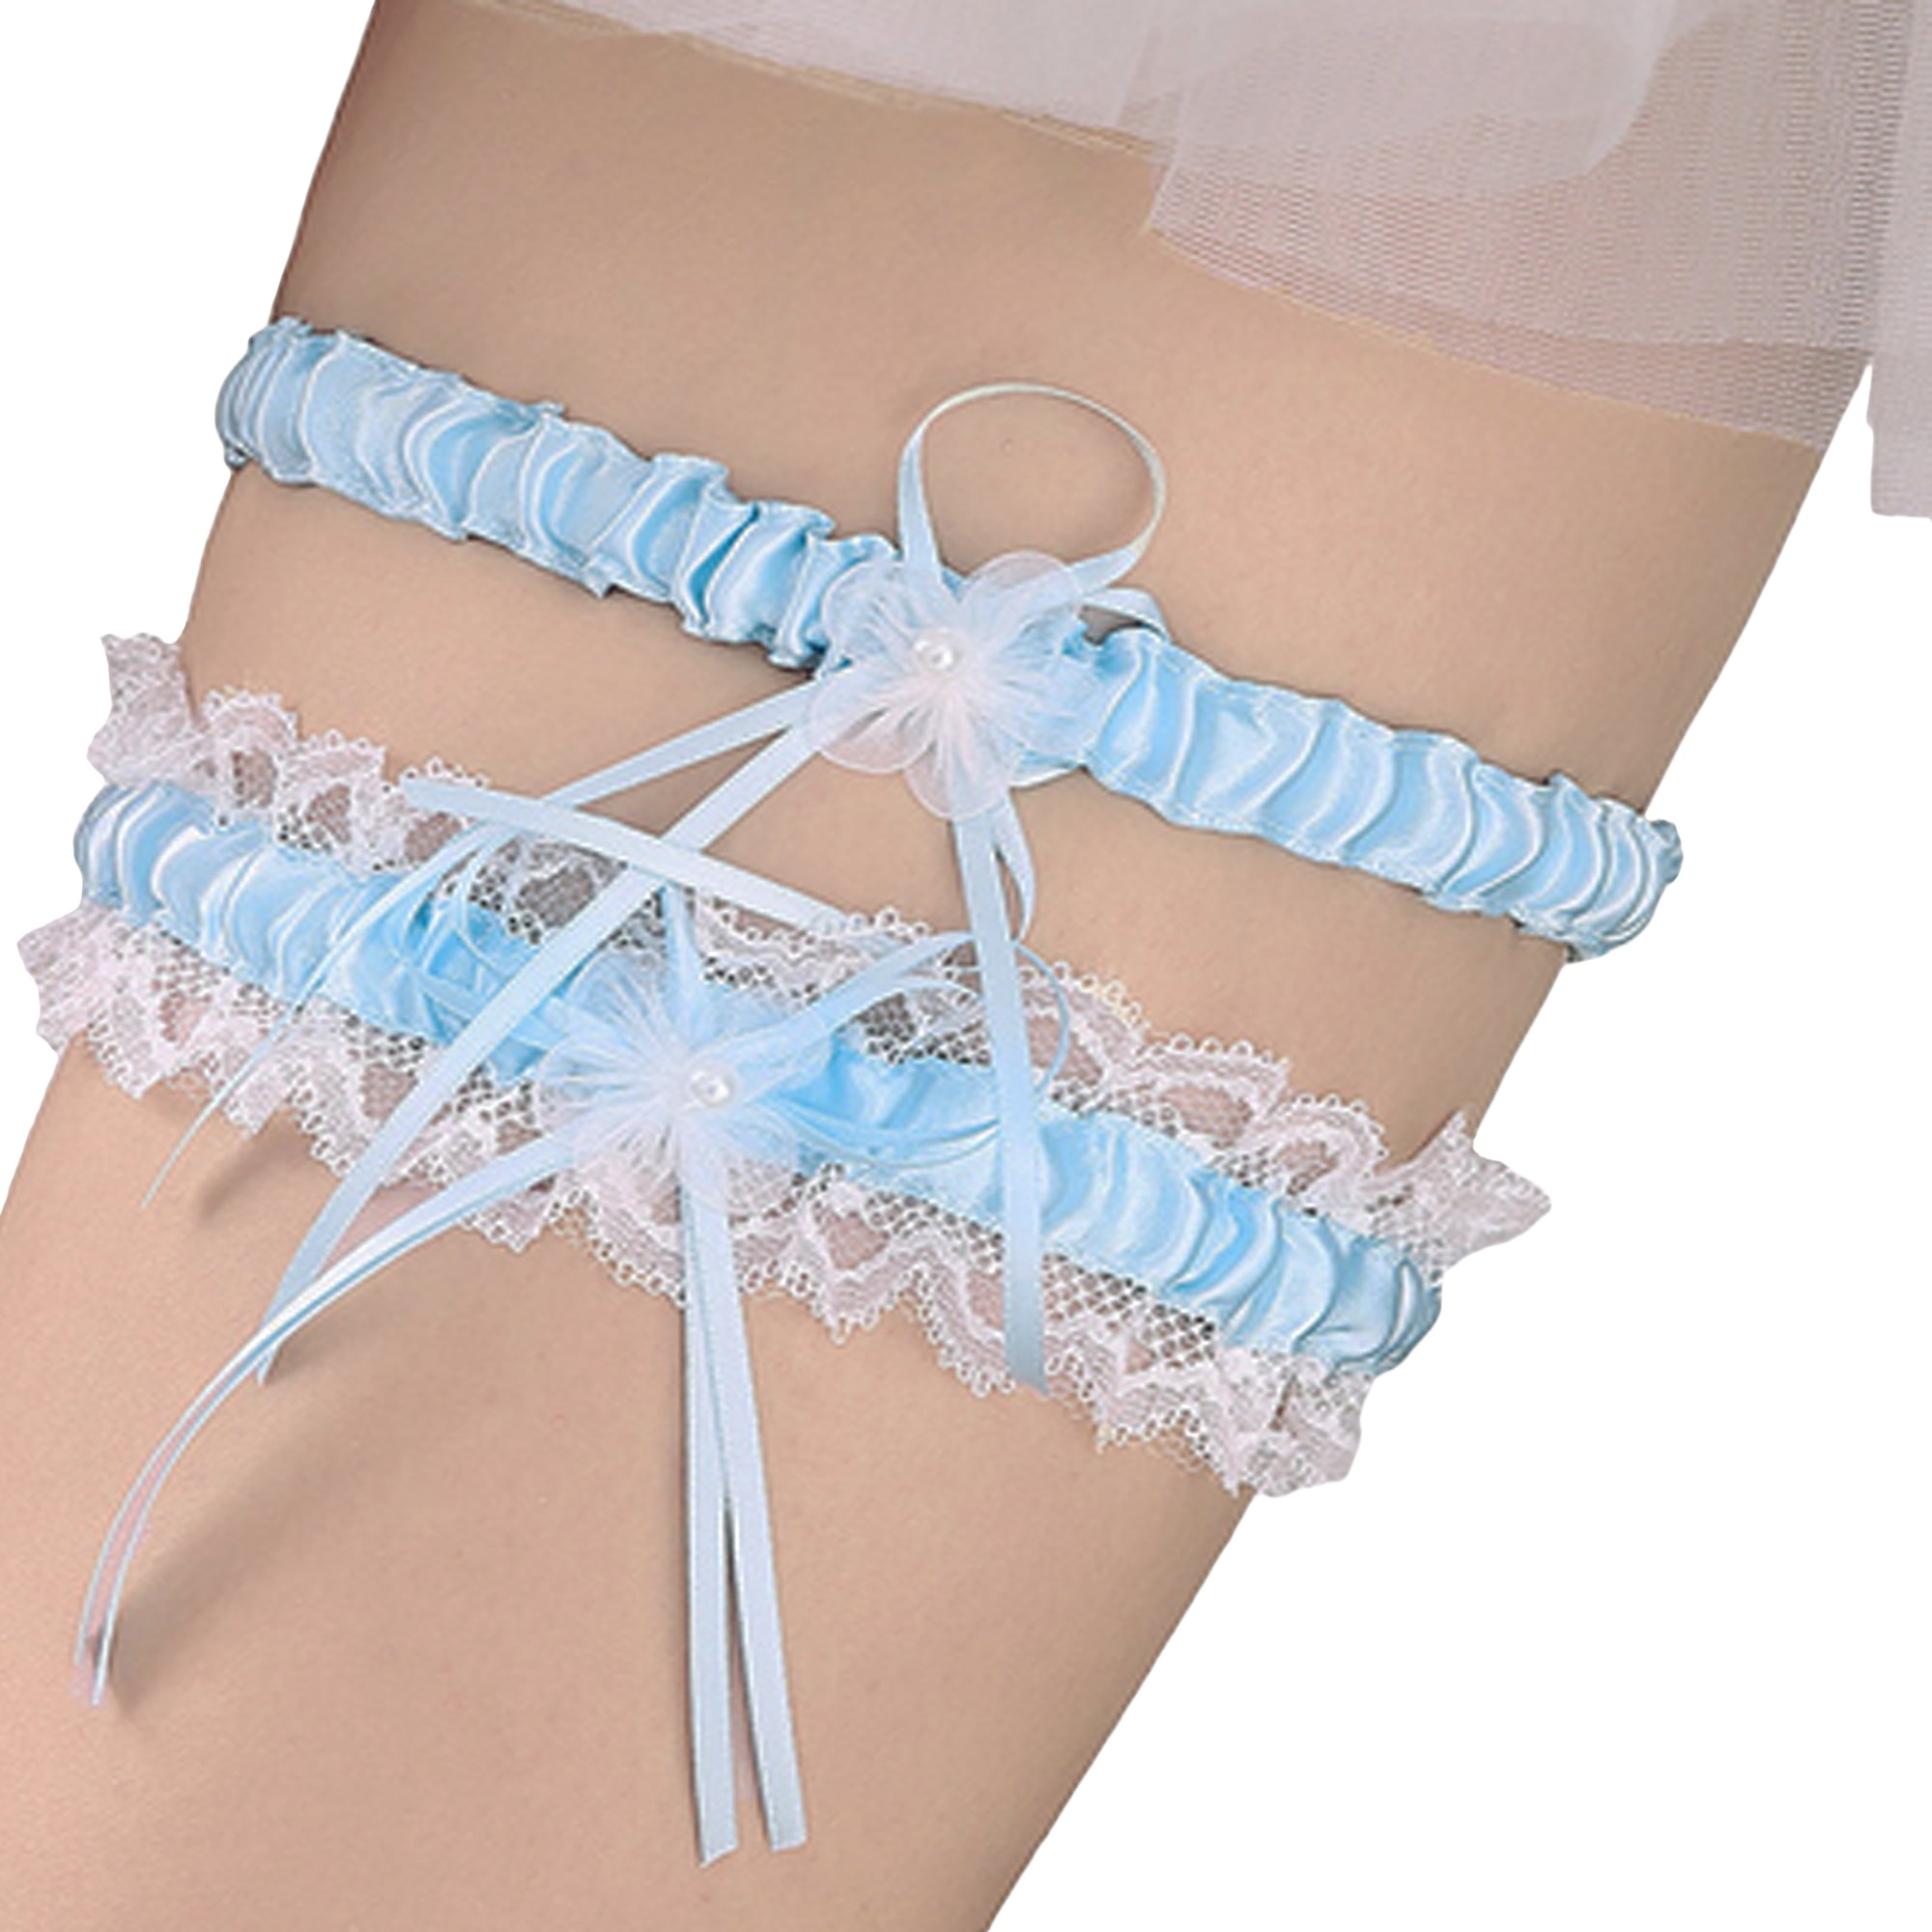 Brides Garter with Fancy Lace and Ribbon Bows and 5 Imitation Pearls